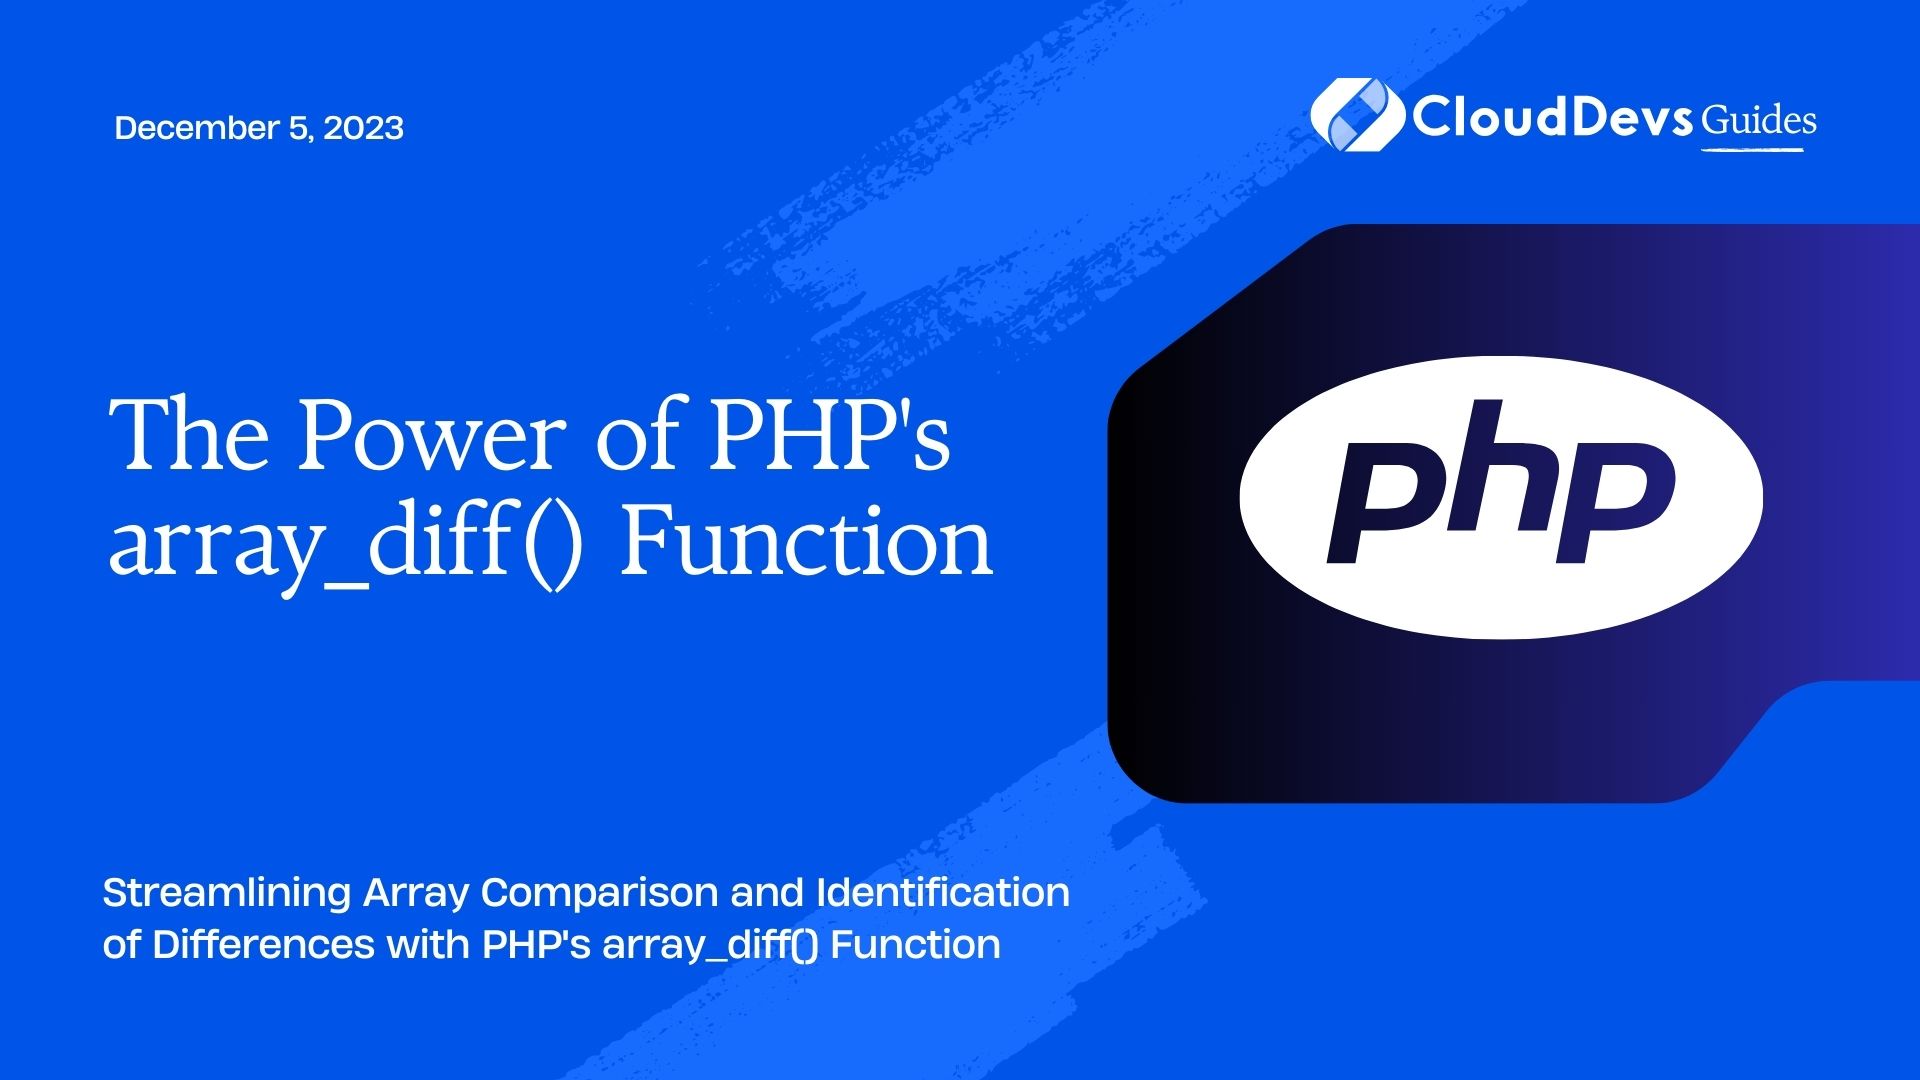 The Power of PHP's array_diff() Function